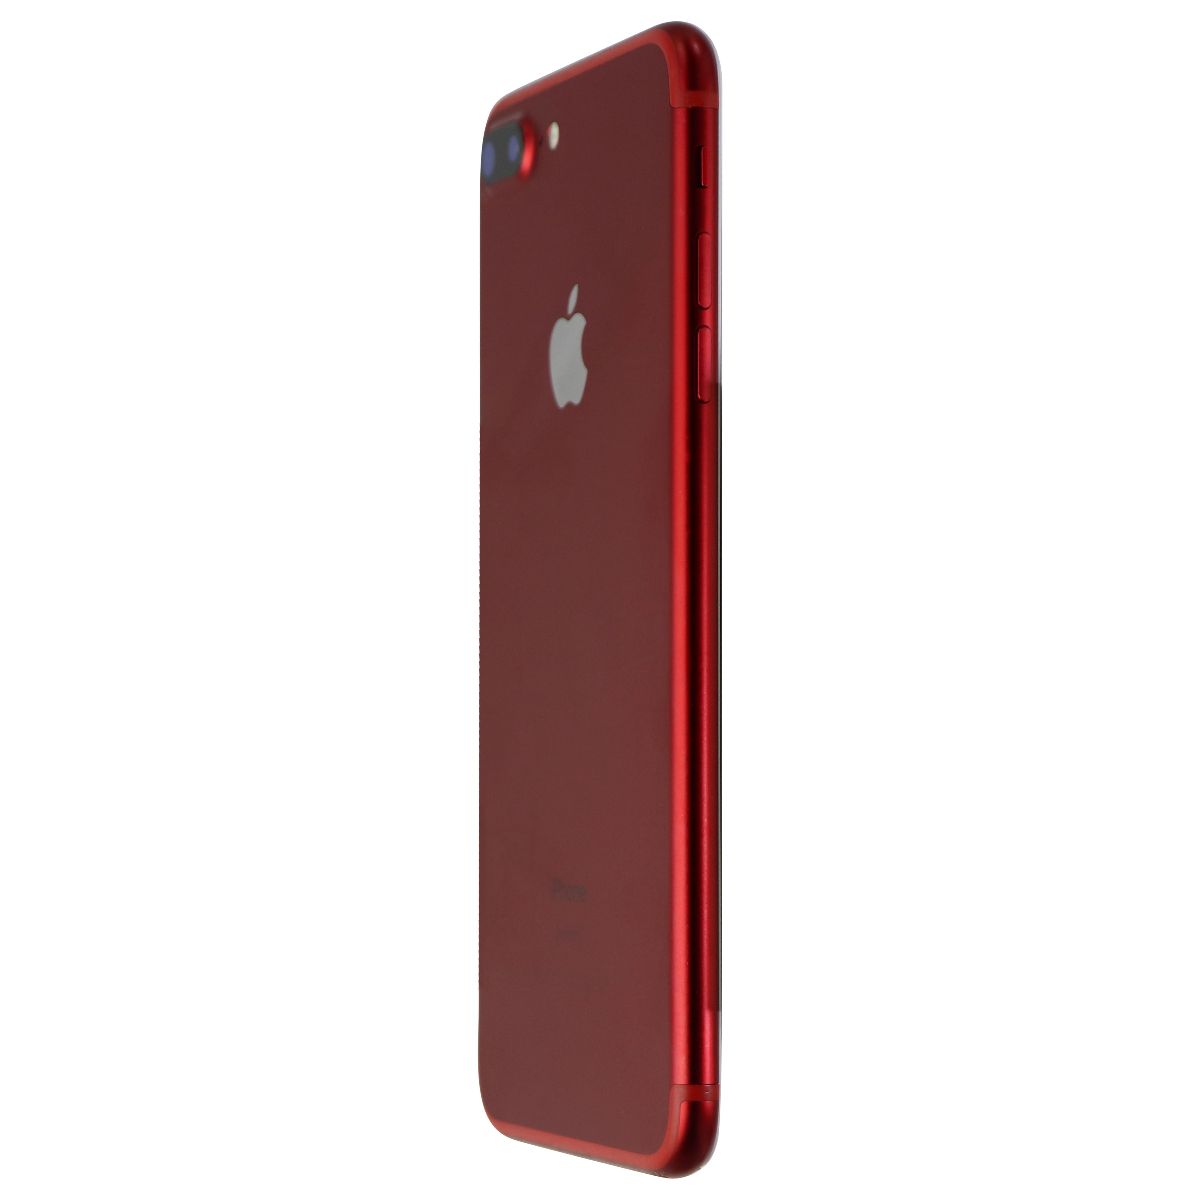 Apple iPhone 7 Plus (5.5-in) (A1661) UNLOCKED - 128GB / Product (RED) Cell Phones & Smartphones Apple    - Simple Cell Bulk Wholesale Pricing - USA Seller